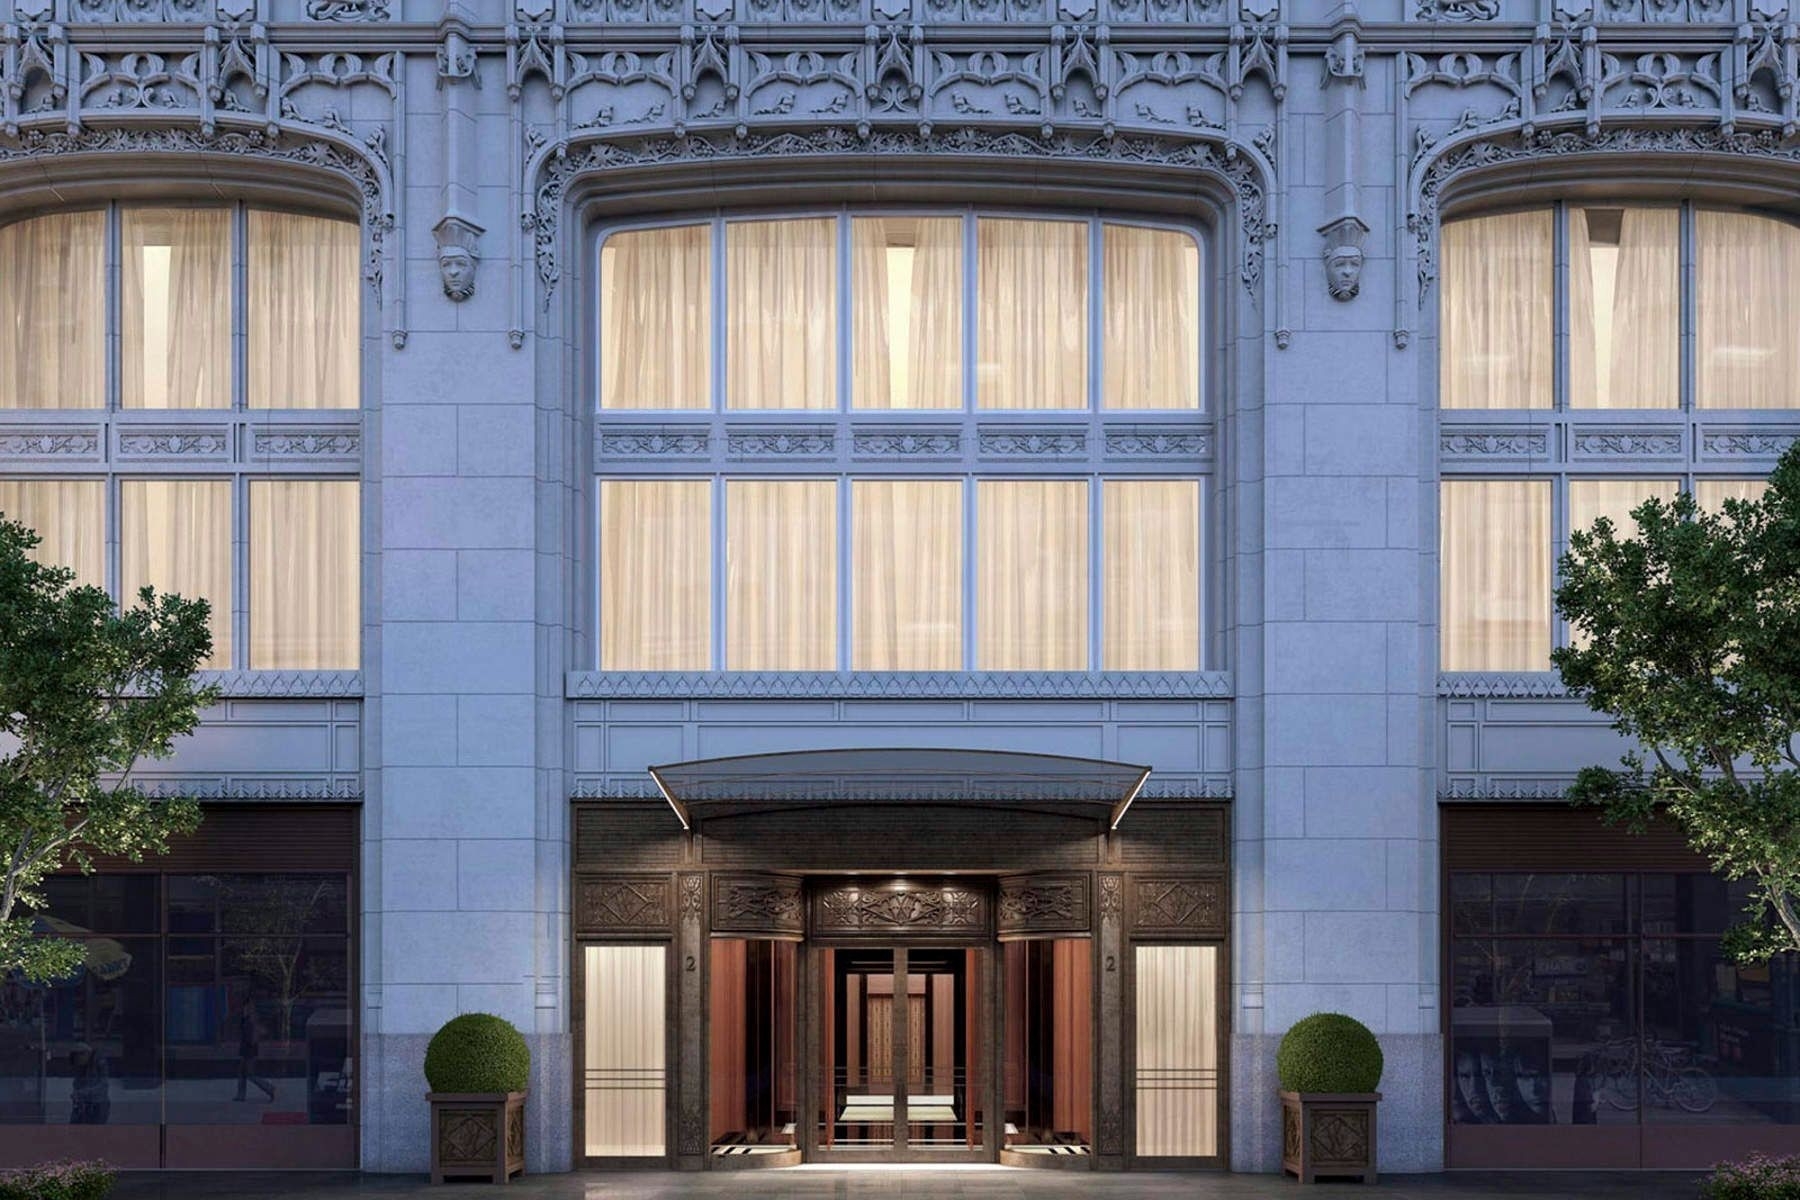 6. Condominiums for Sale at Woolworth Building, 2 PARK PL, 45B TriBeCa, New York, New York 10007